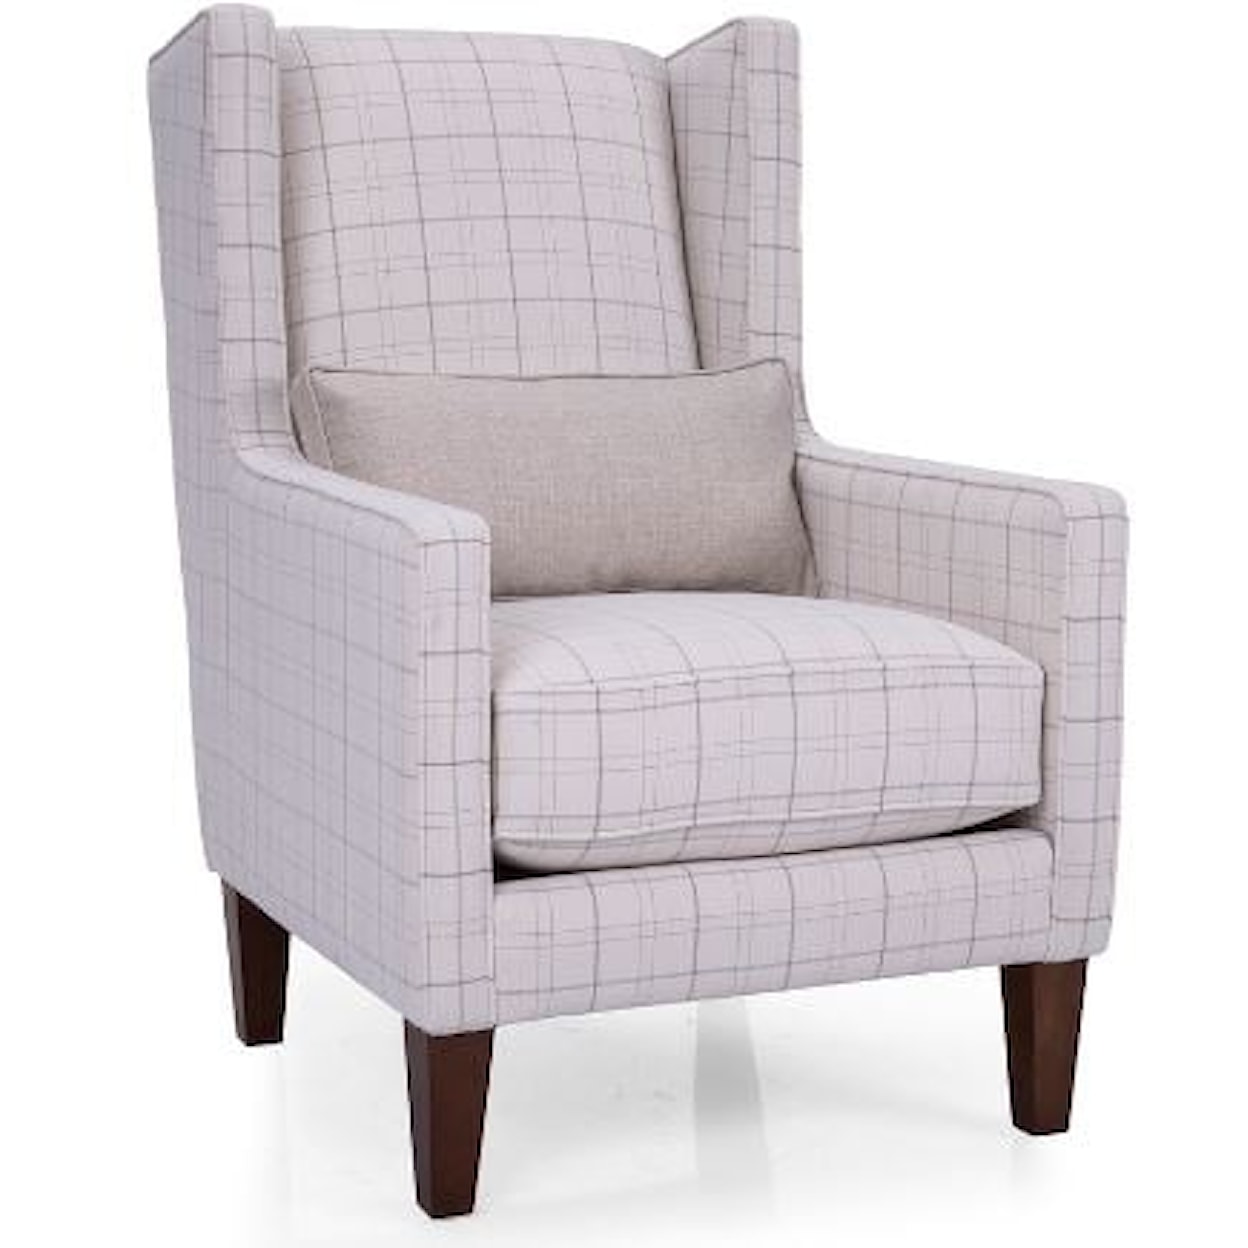 Taelor Designs 7628 Wing Chair